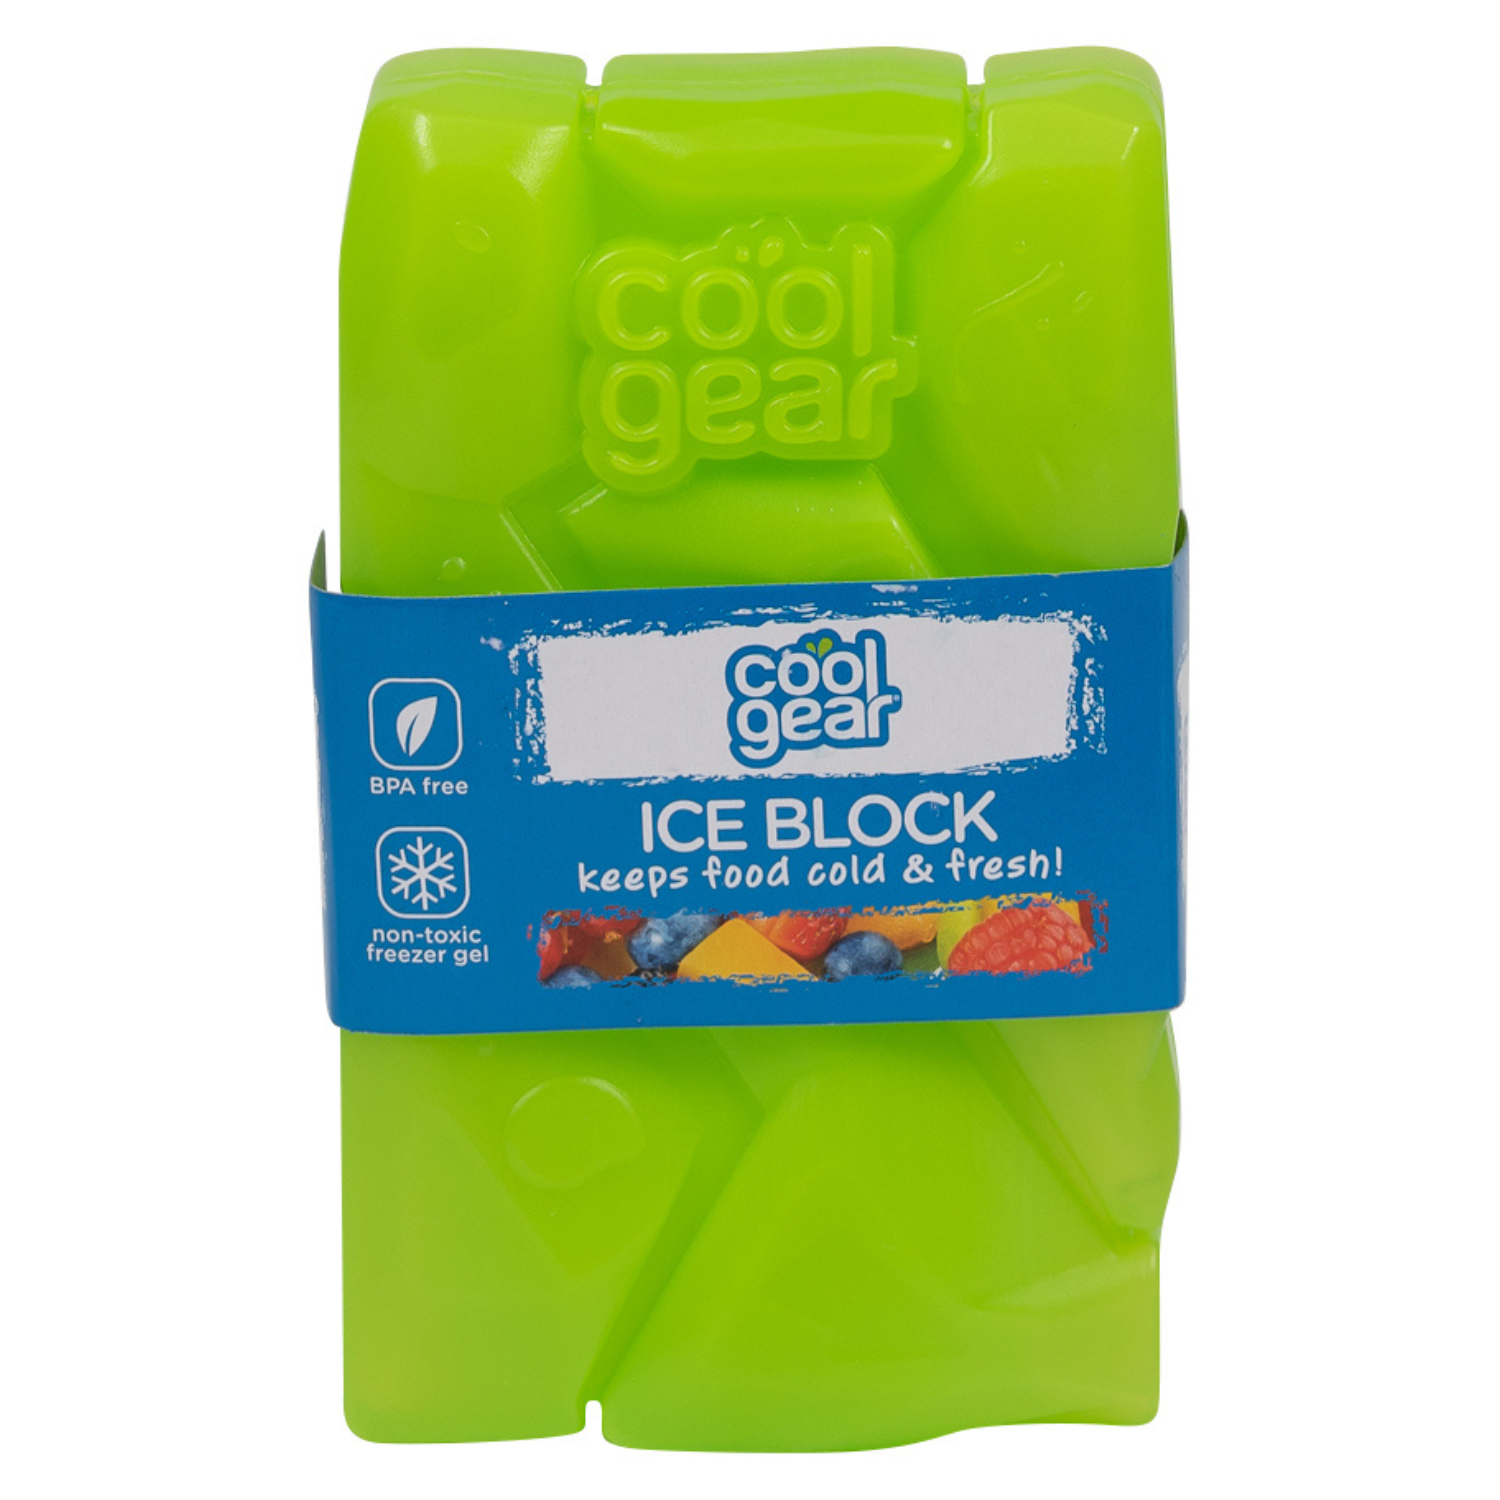 Cool Gear 4-Pack Fat Ice Pack | Reusable Ice Blocks for Lunch Box, Coolers,  & More | BPA Free with Non-Toxic Freezer Gel | Keeps Food Cold & Fresh